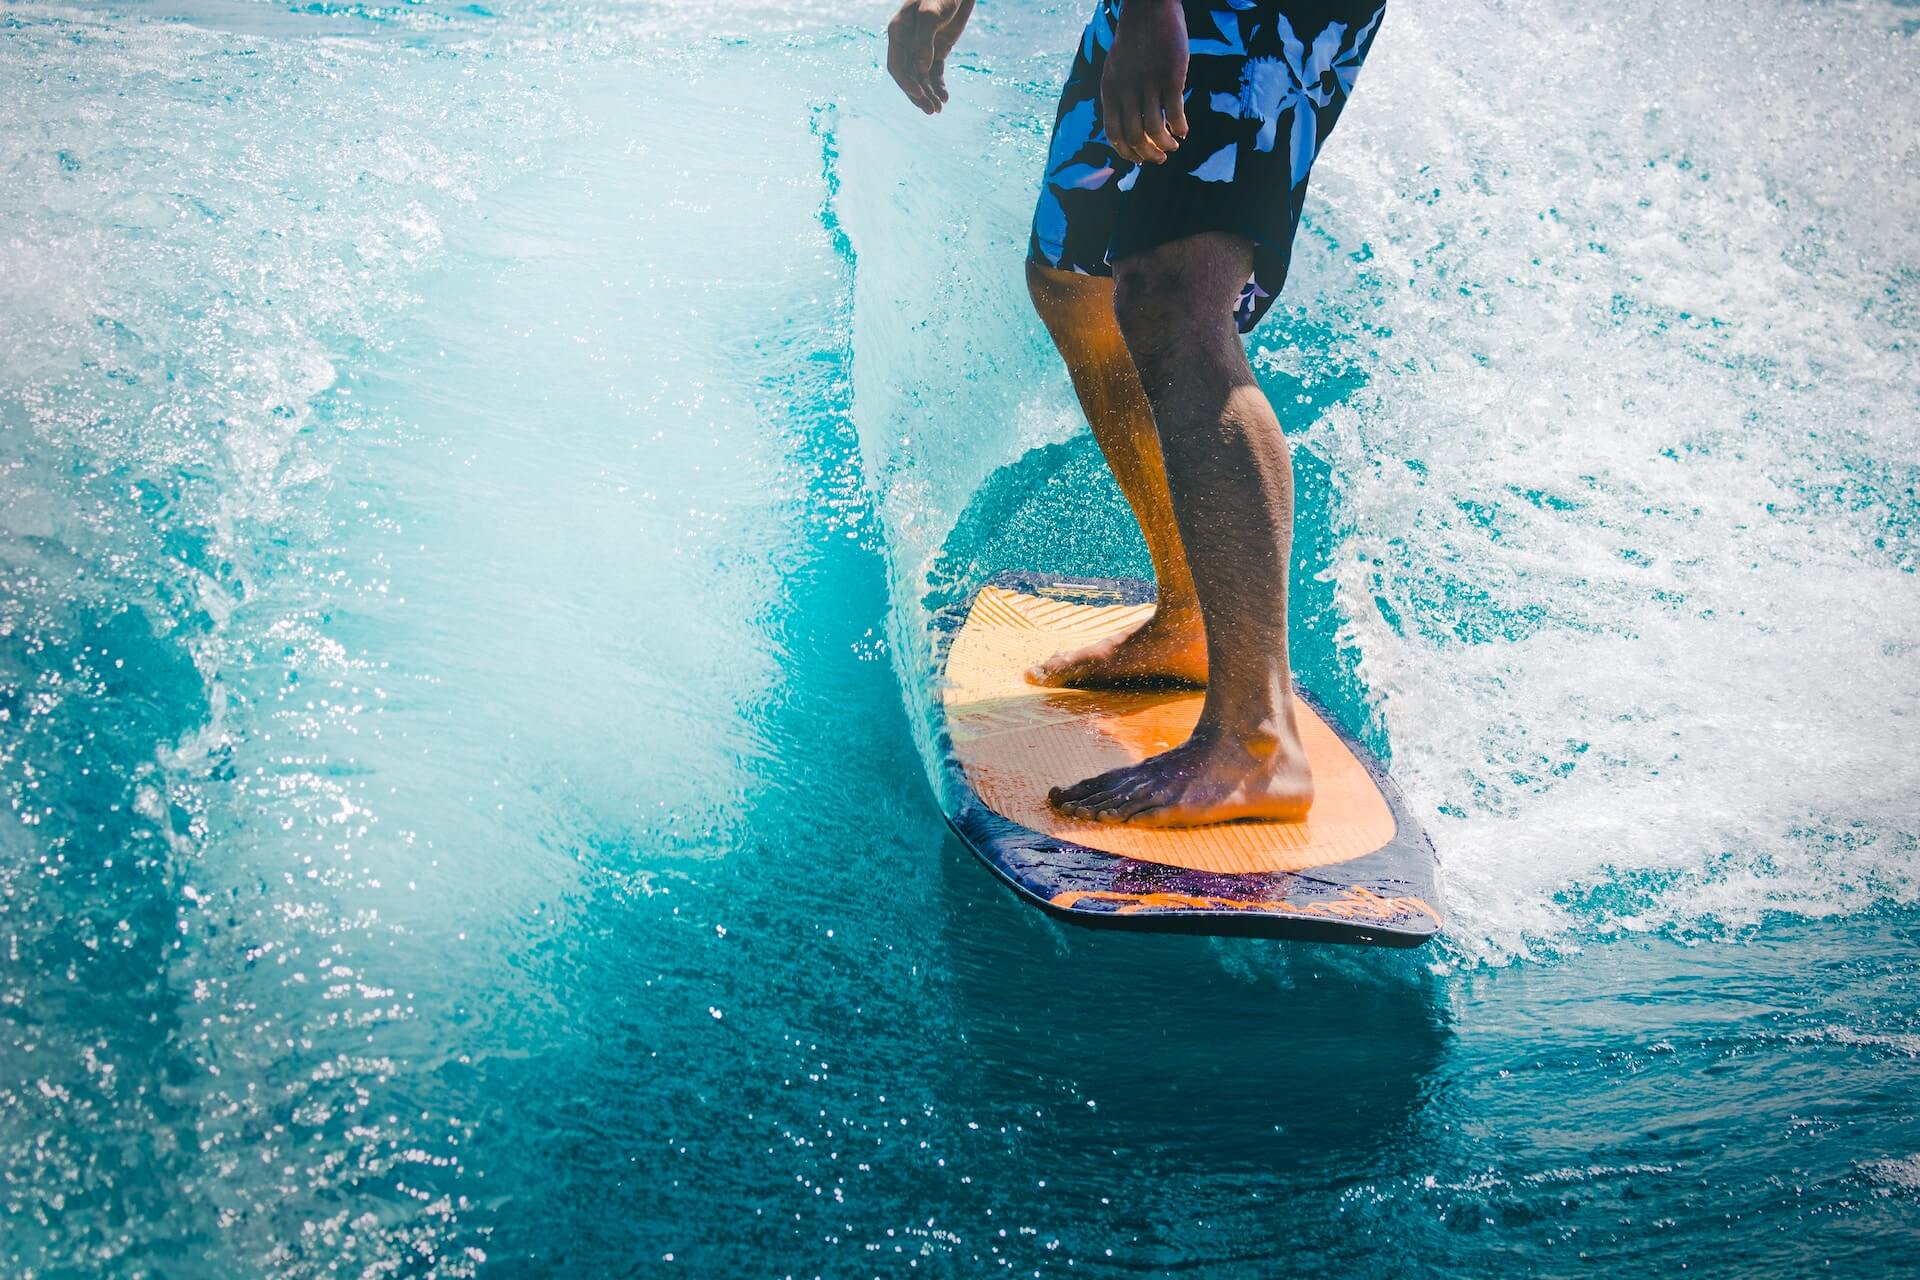 close up of a man surfing on a wave